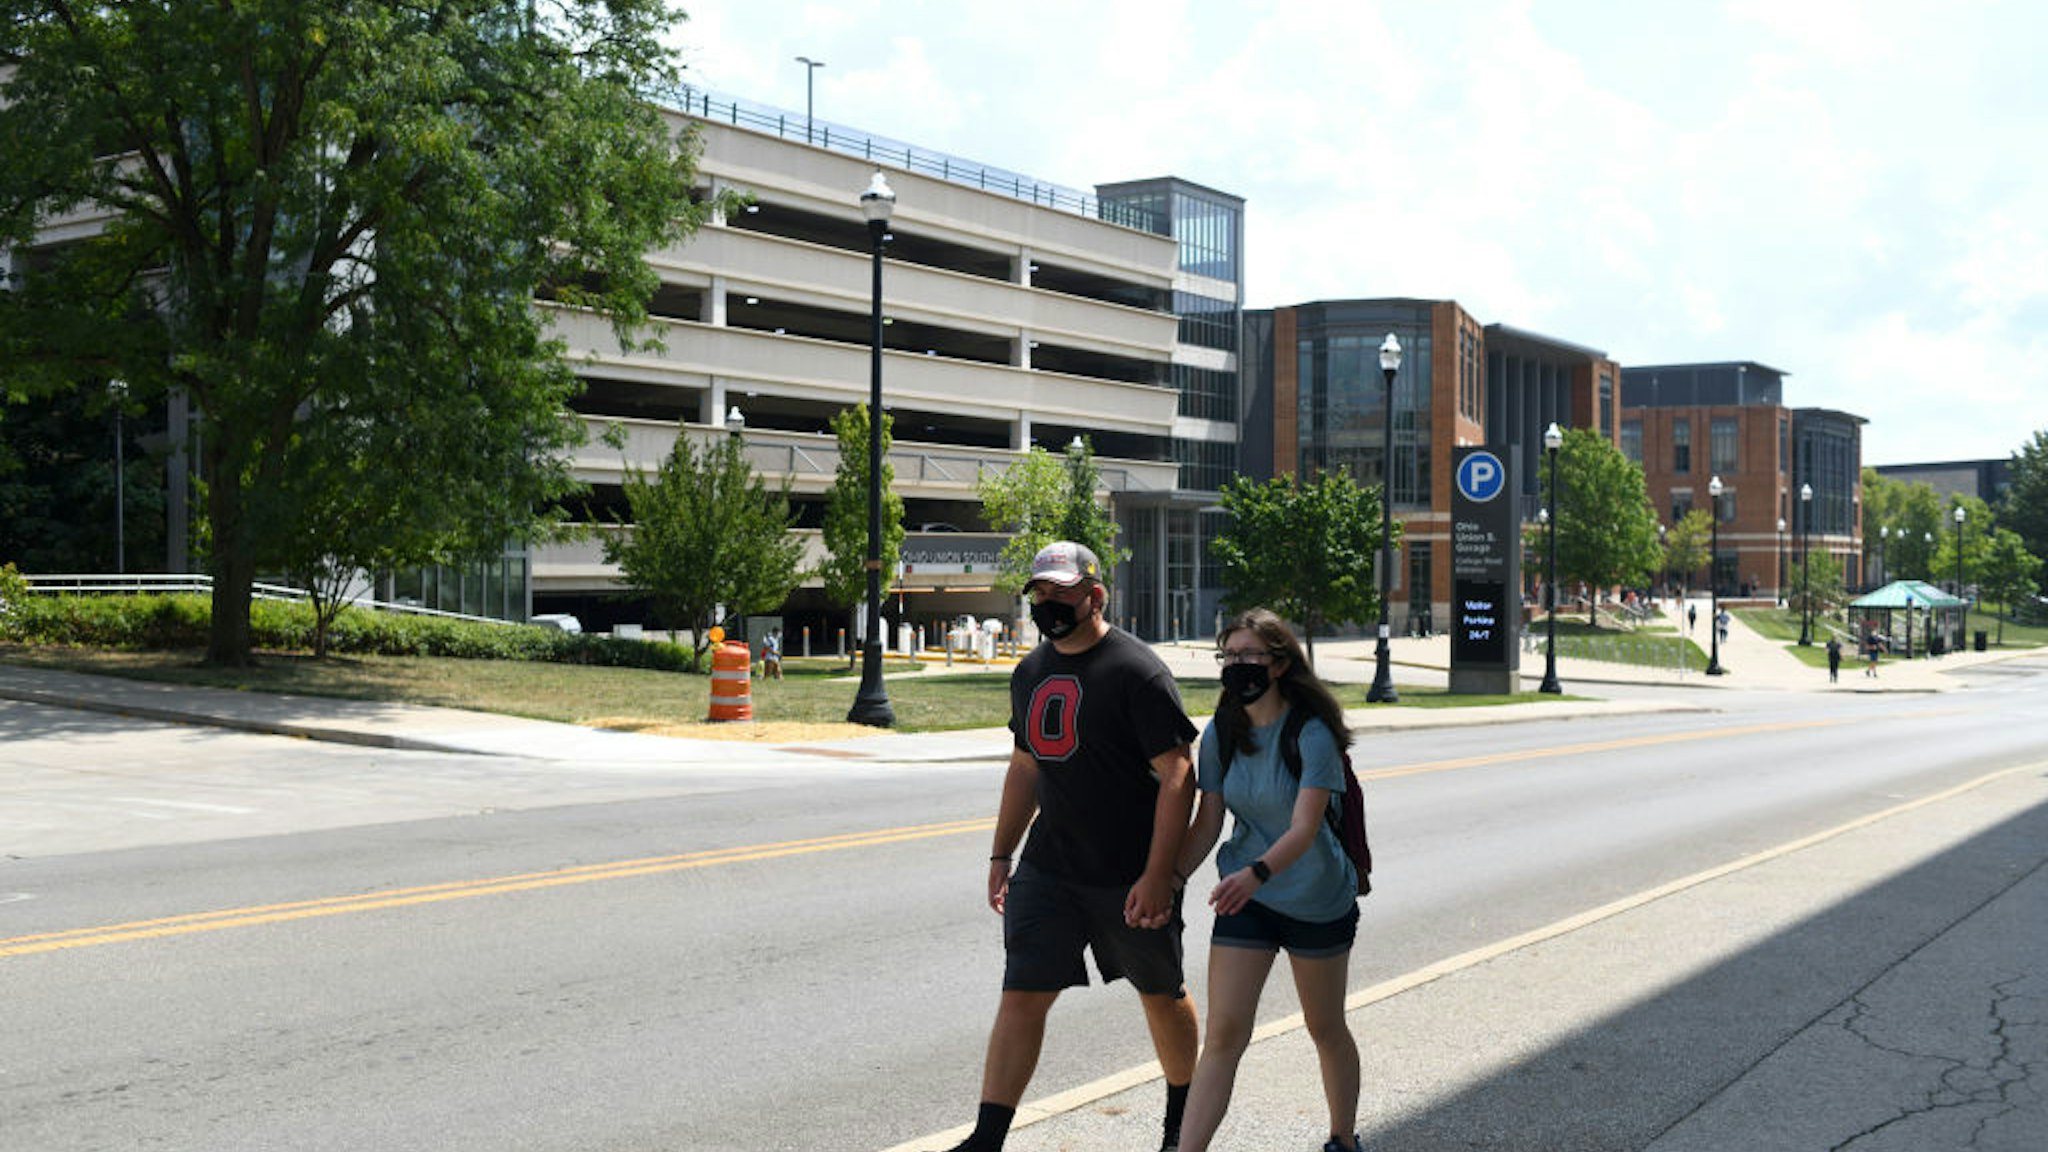 Students wearing protective masks walk through campus during the first of classes at Ohio State University in Columbus, Ohio, U.S., on Tuesday, Aug. 25, 2020. Some of Ohio's colleges and universities have begun moving students in, but the navigation of a school year amid a pandemic is still a balancing act.